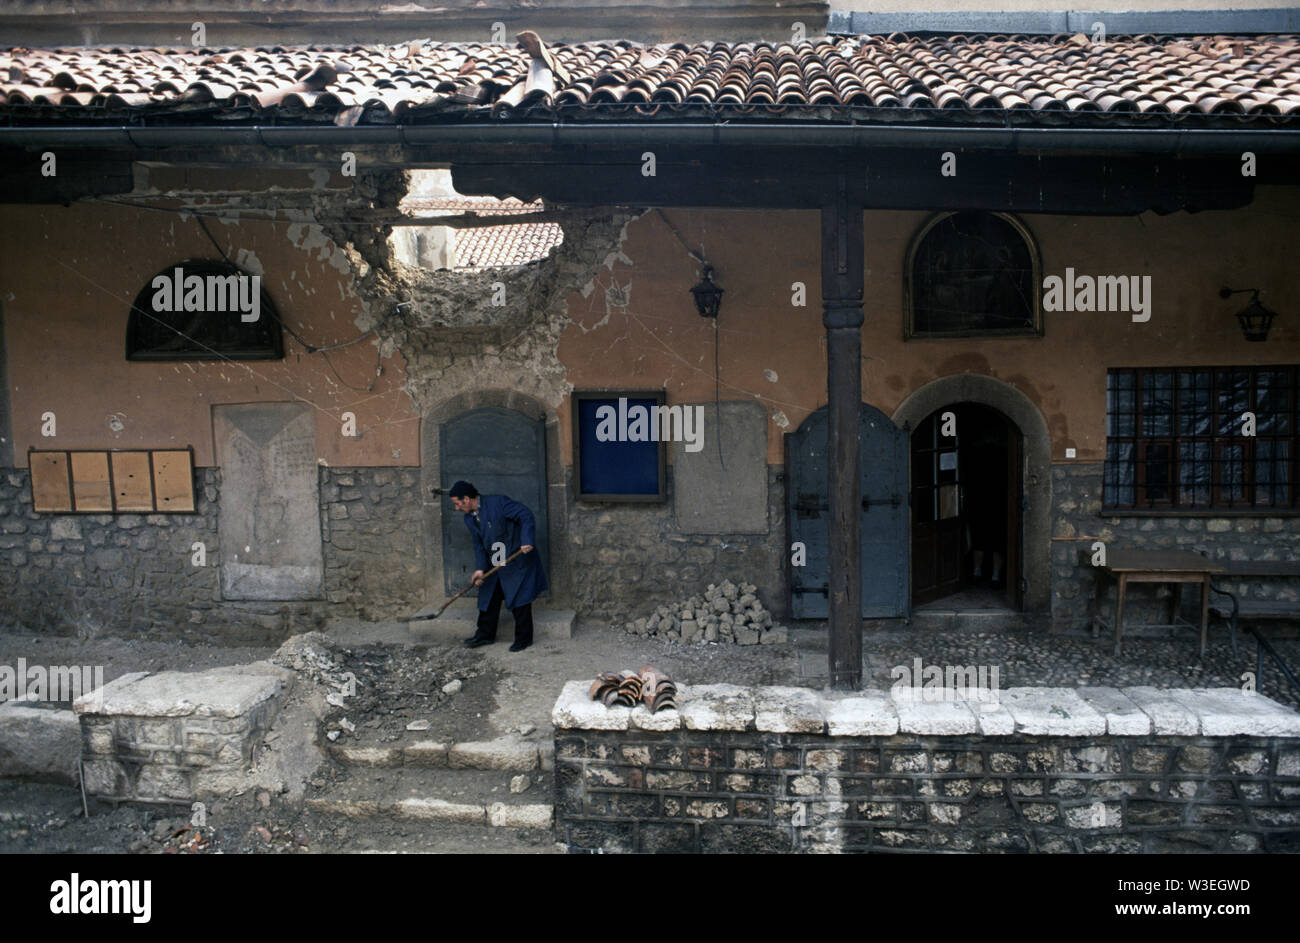 5th April 1993 During the Siege of Sarajevo: in the courtyard of the oldest Orthodox church in Sarajevo, a man shovels up debris below a large hole in the wall made by a mortar bomb or artillery shell. Stock Photo